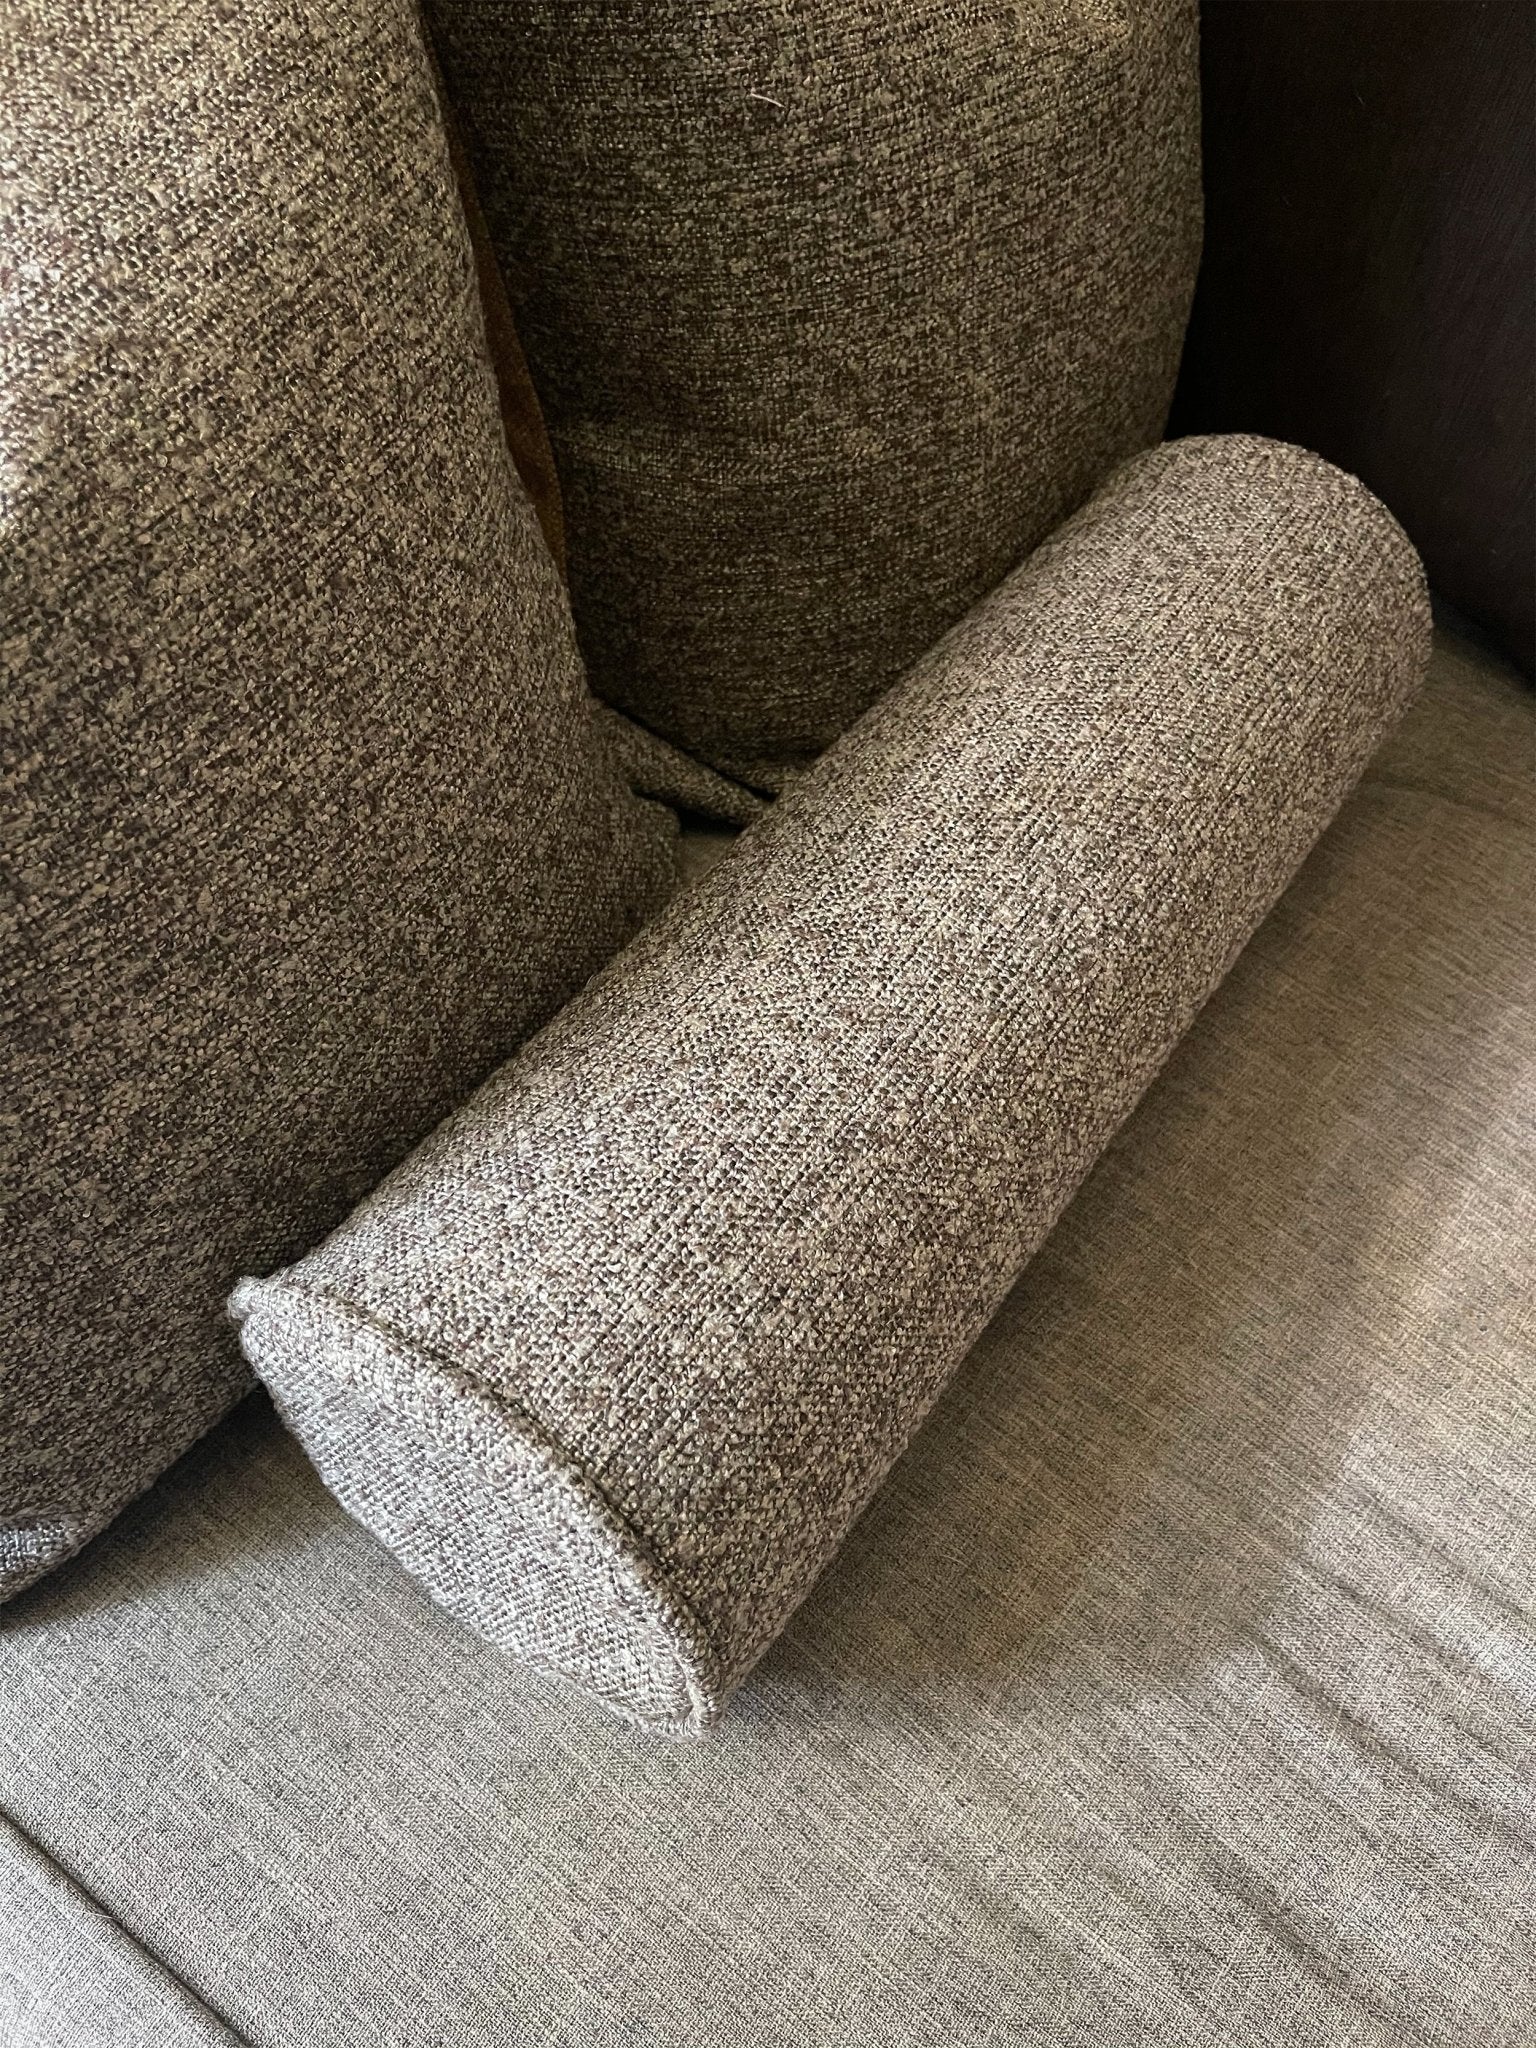 Classic boucle bolster pillow in cozy fabric comes in multiple colorways, perfect for all seasons